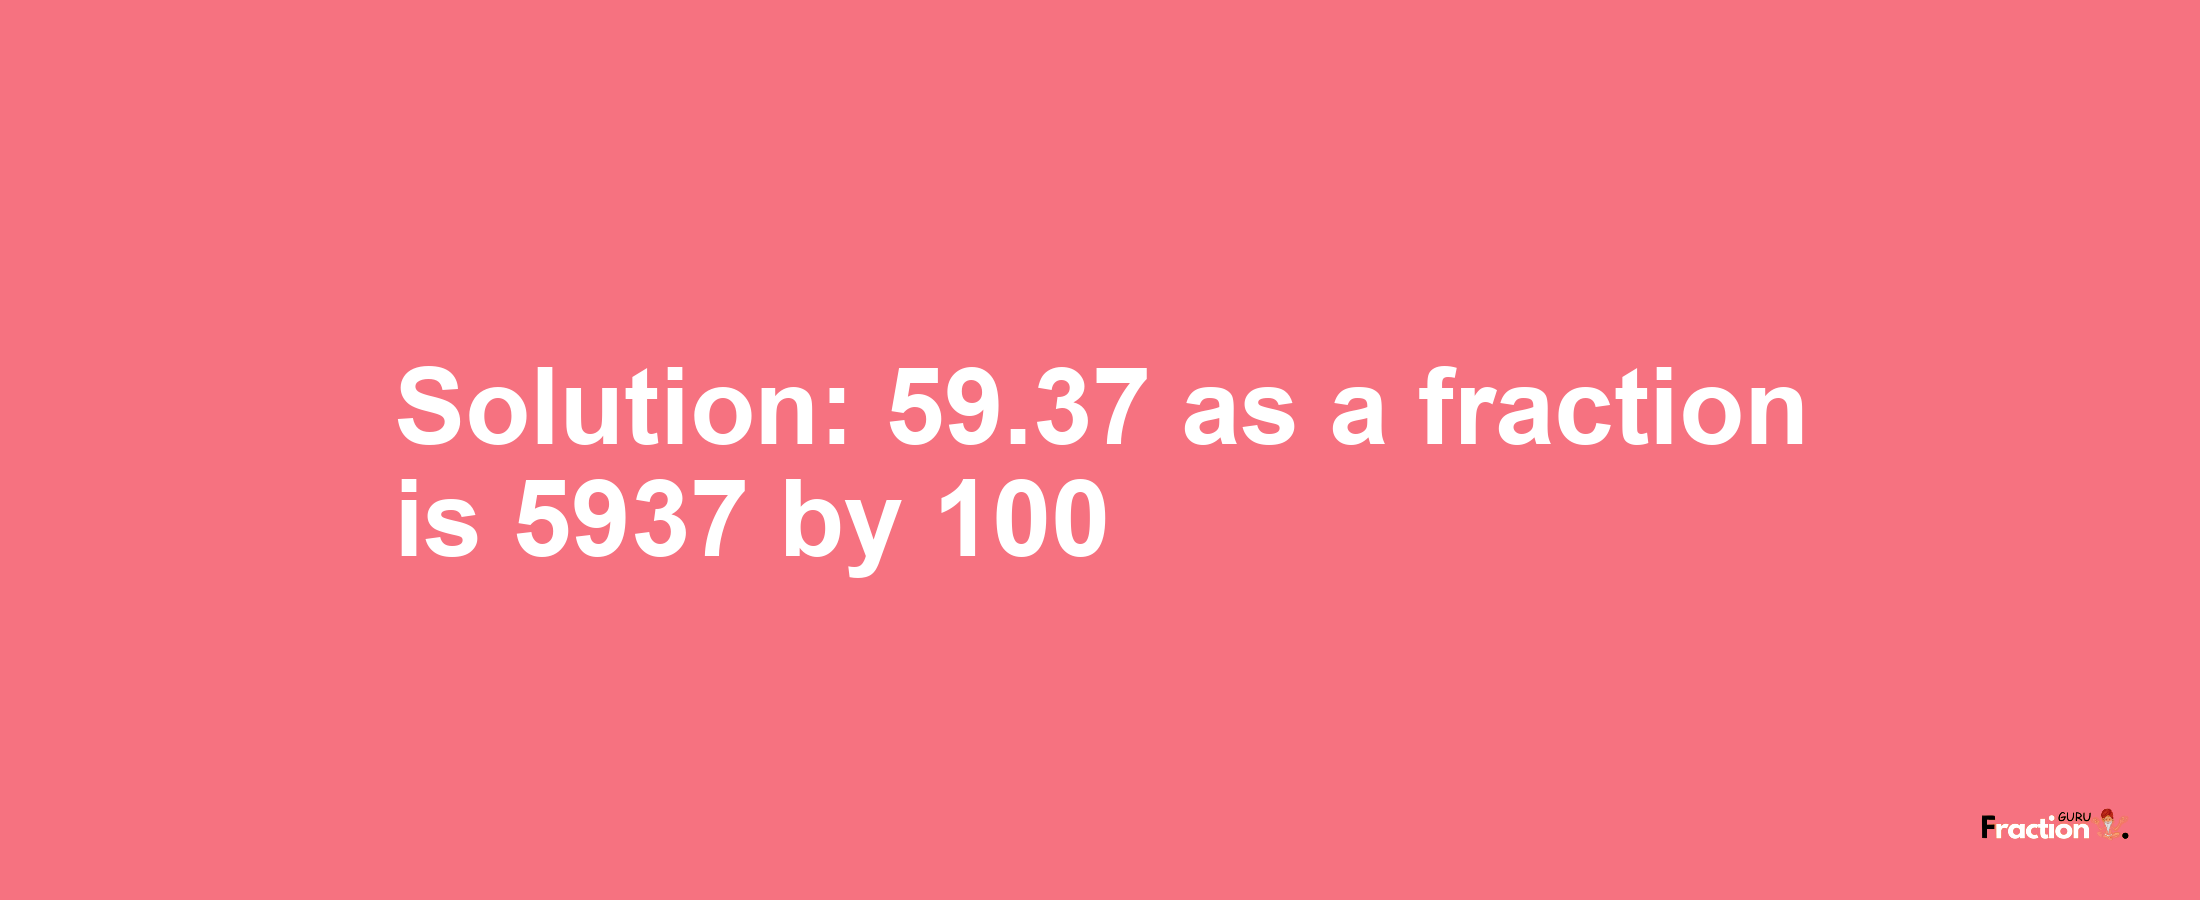 Solution:59.37 as a fraction is 5937/100